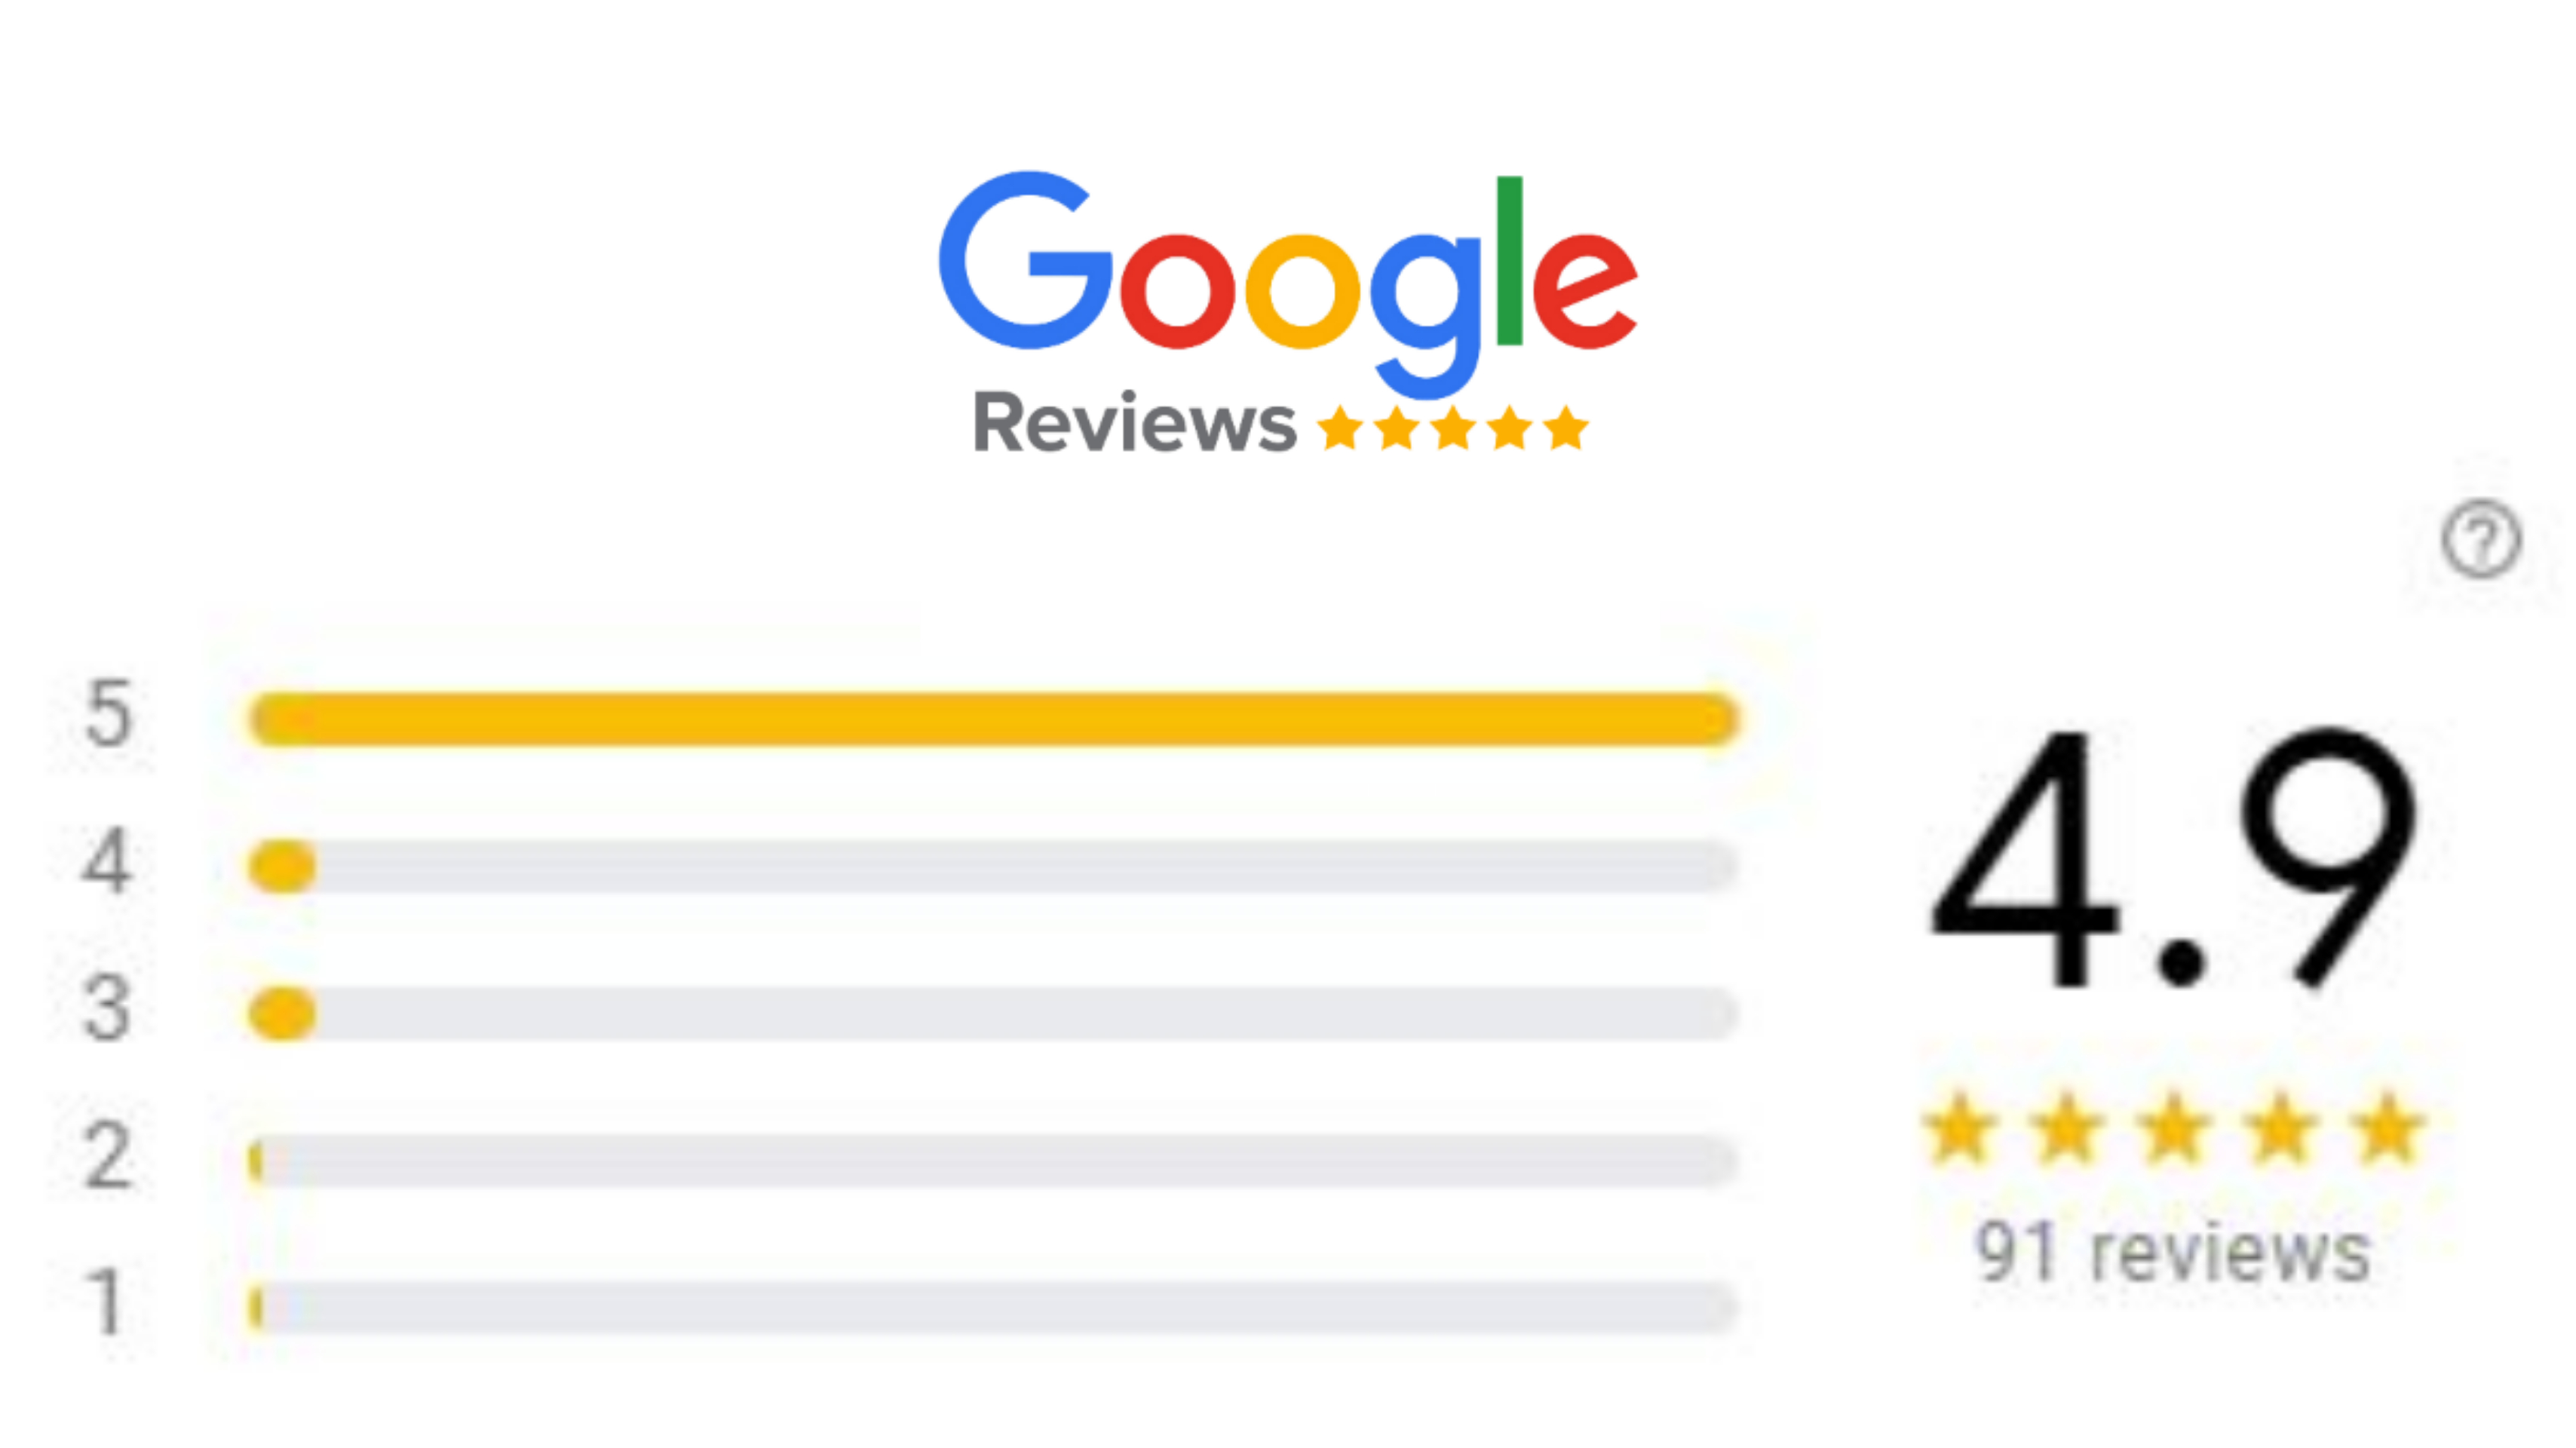 Reviews on google